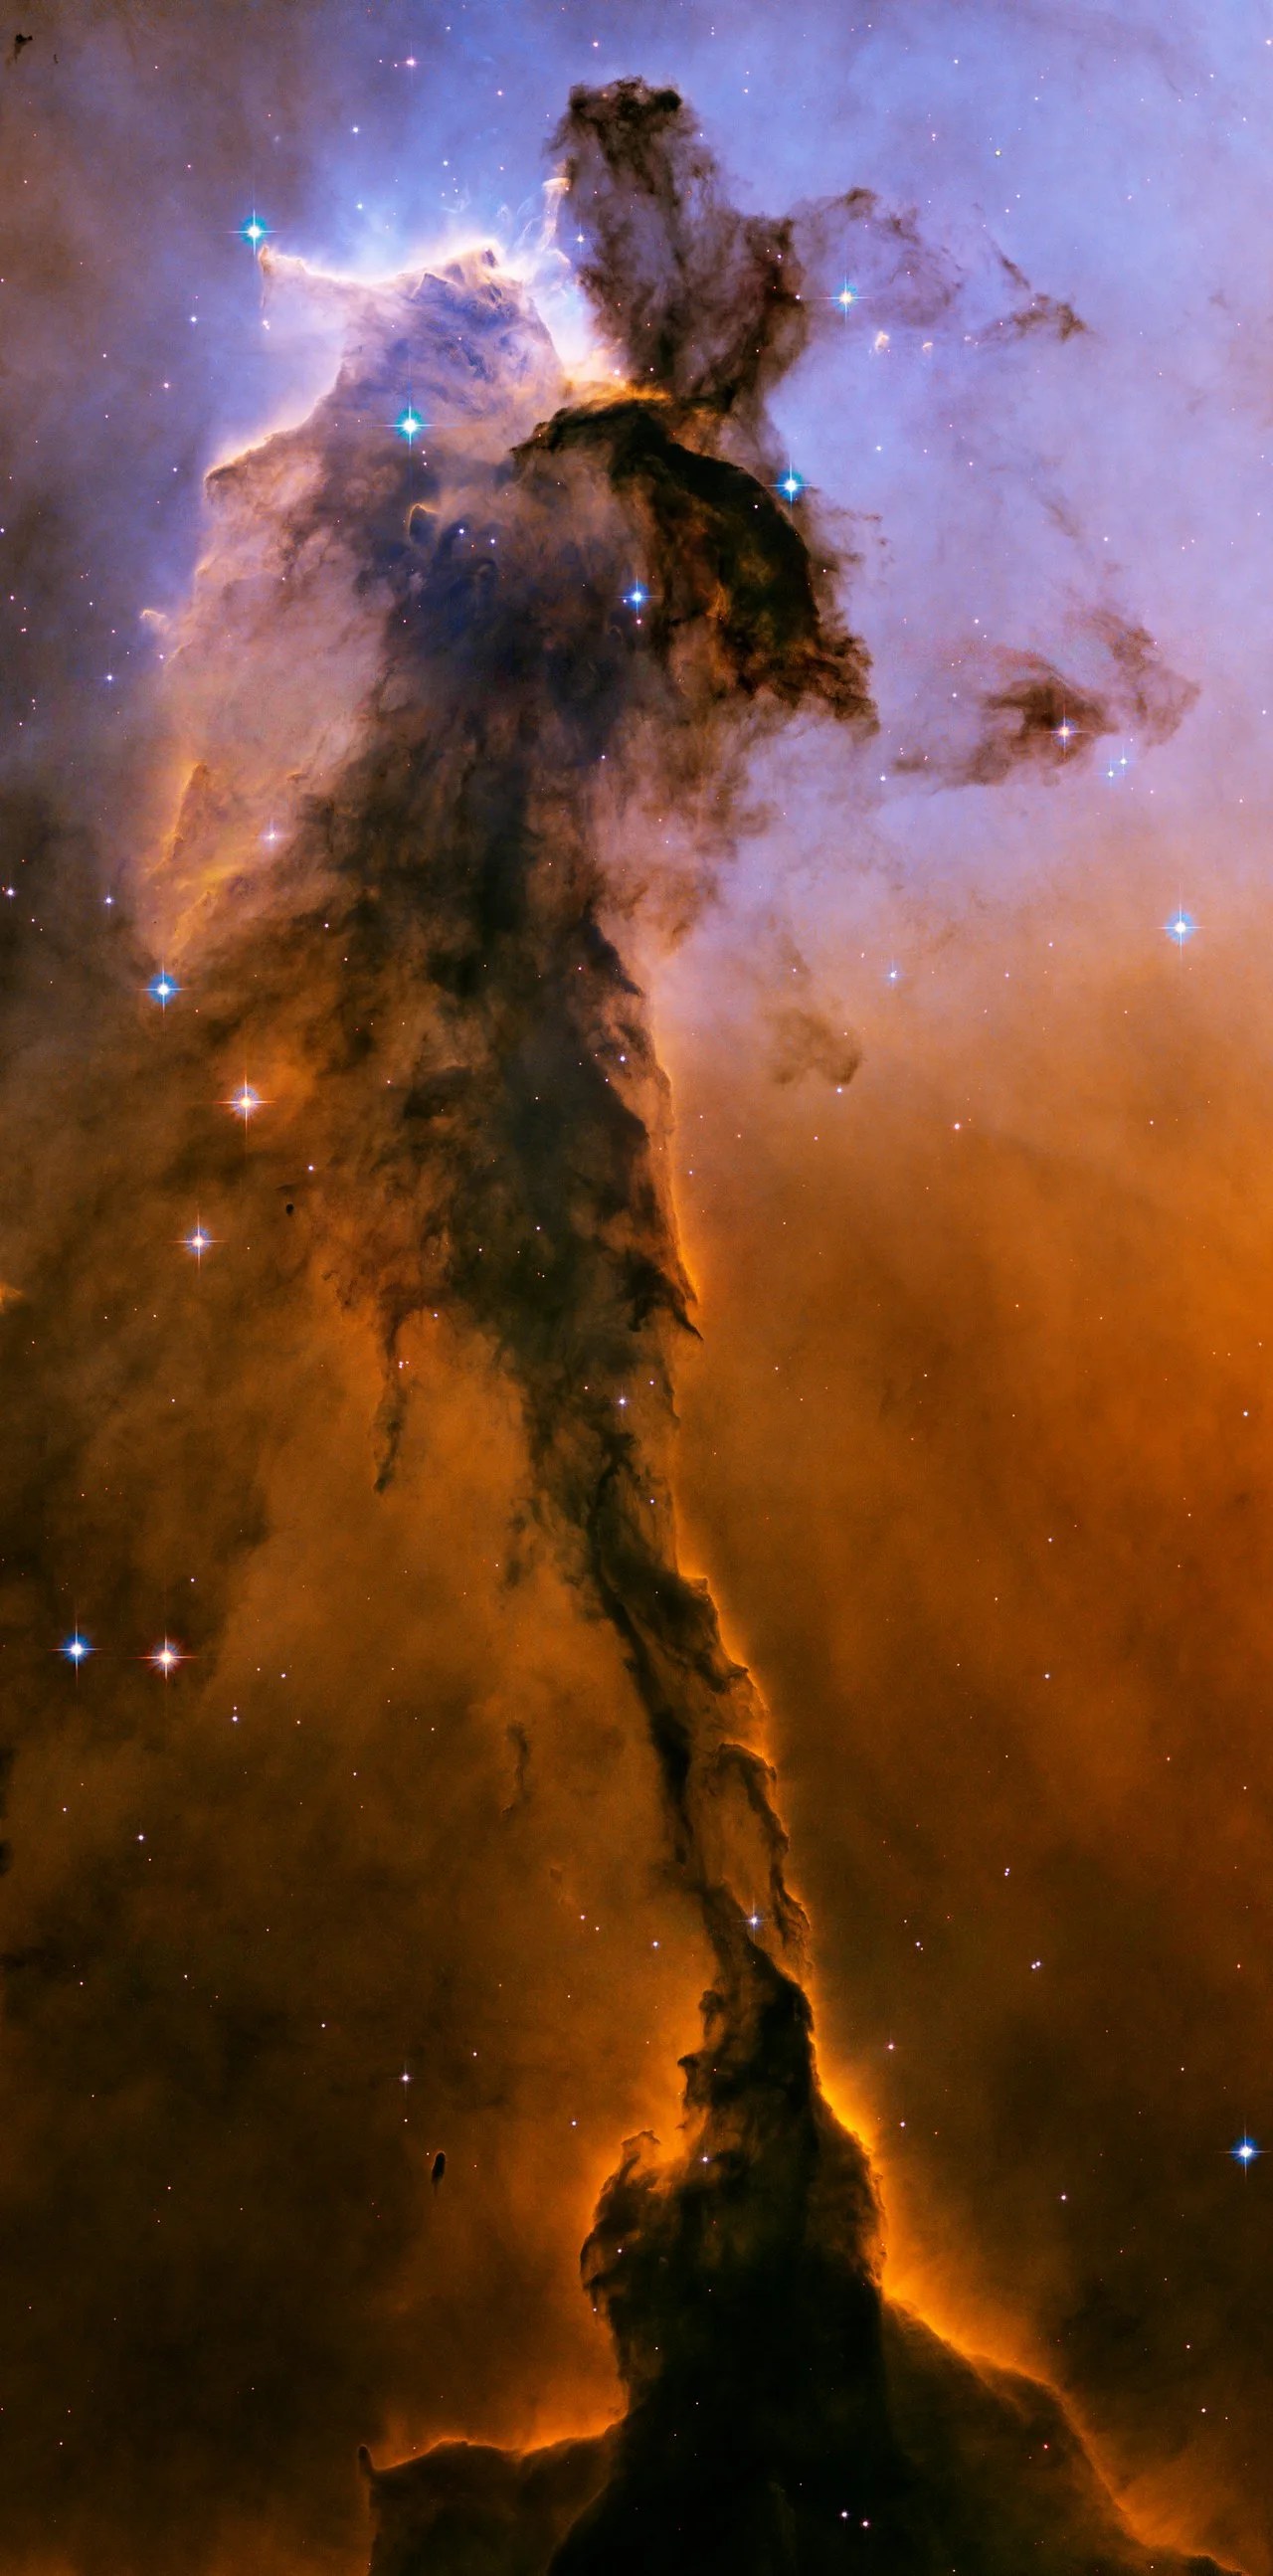 Hubble view of a brownish spire of gas and dust within M16, against a background of mostly red and some blue gas.